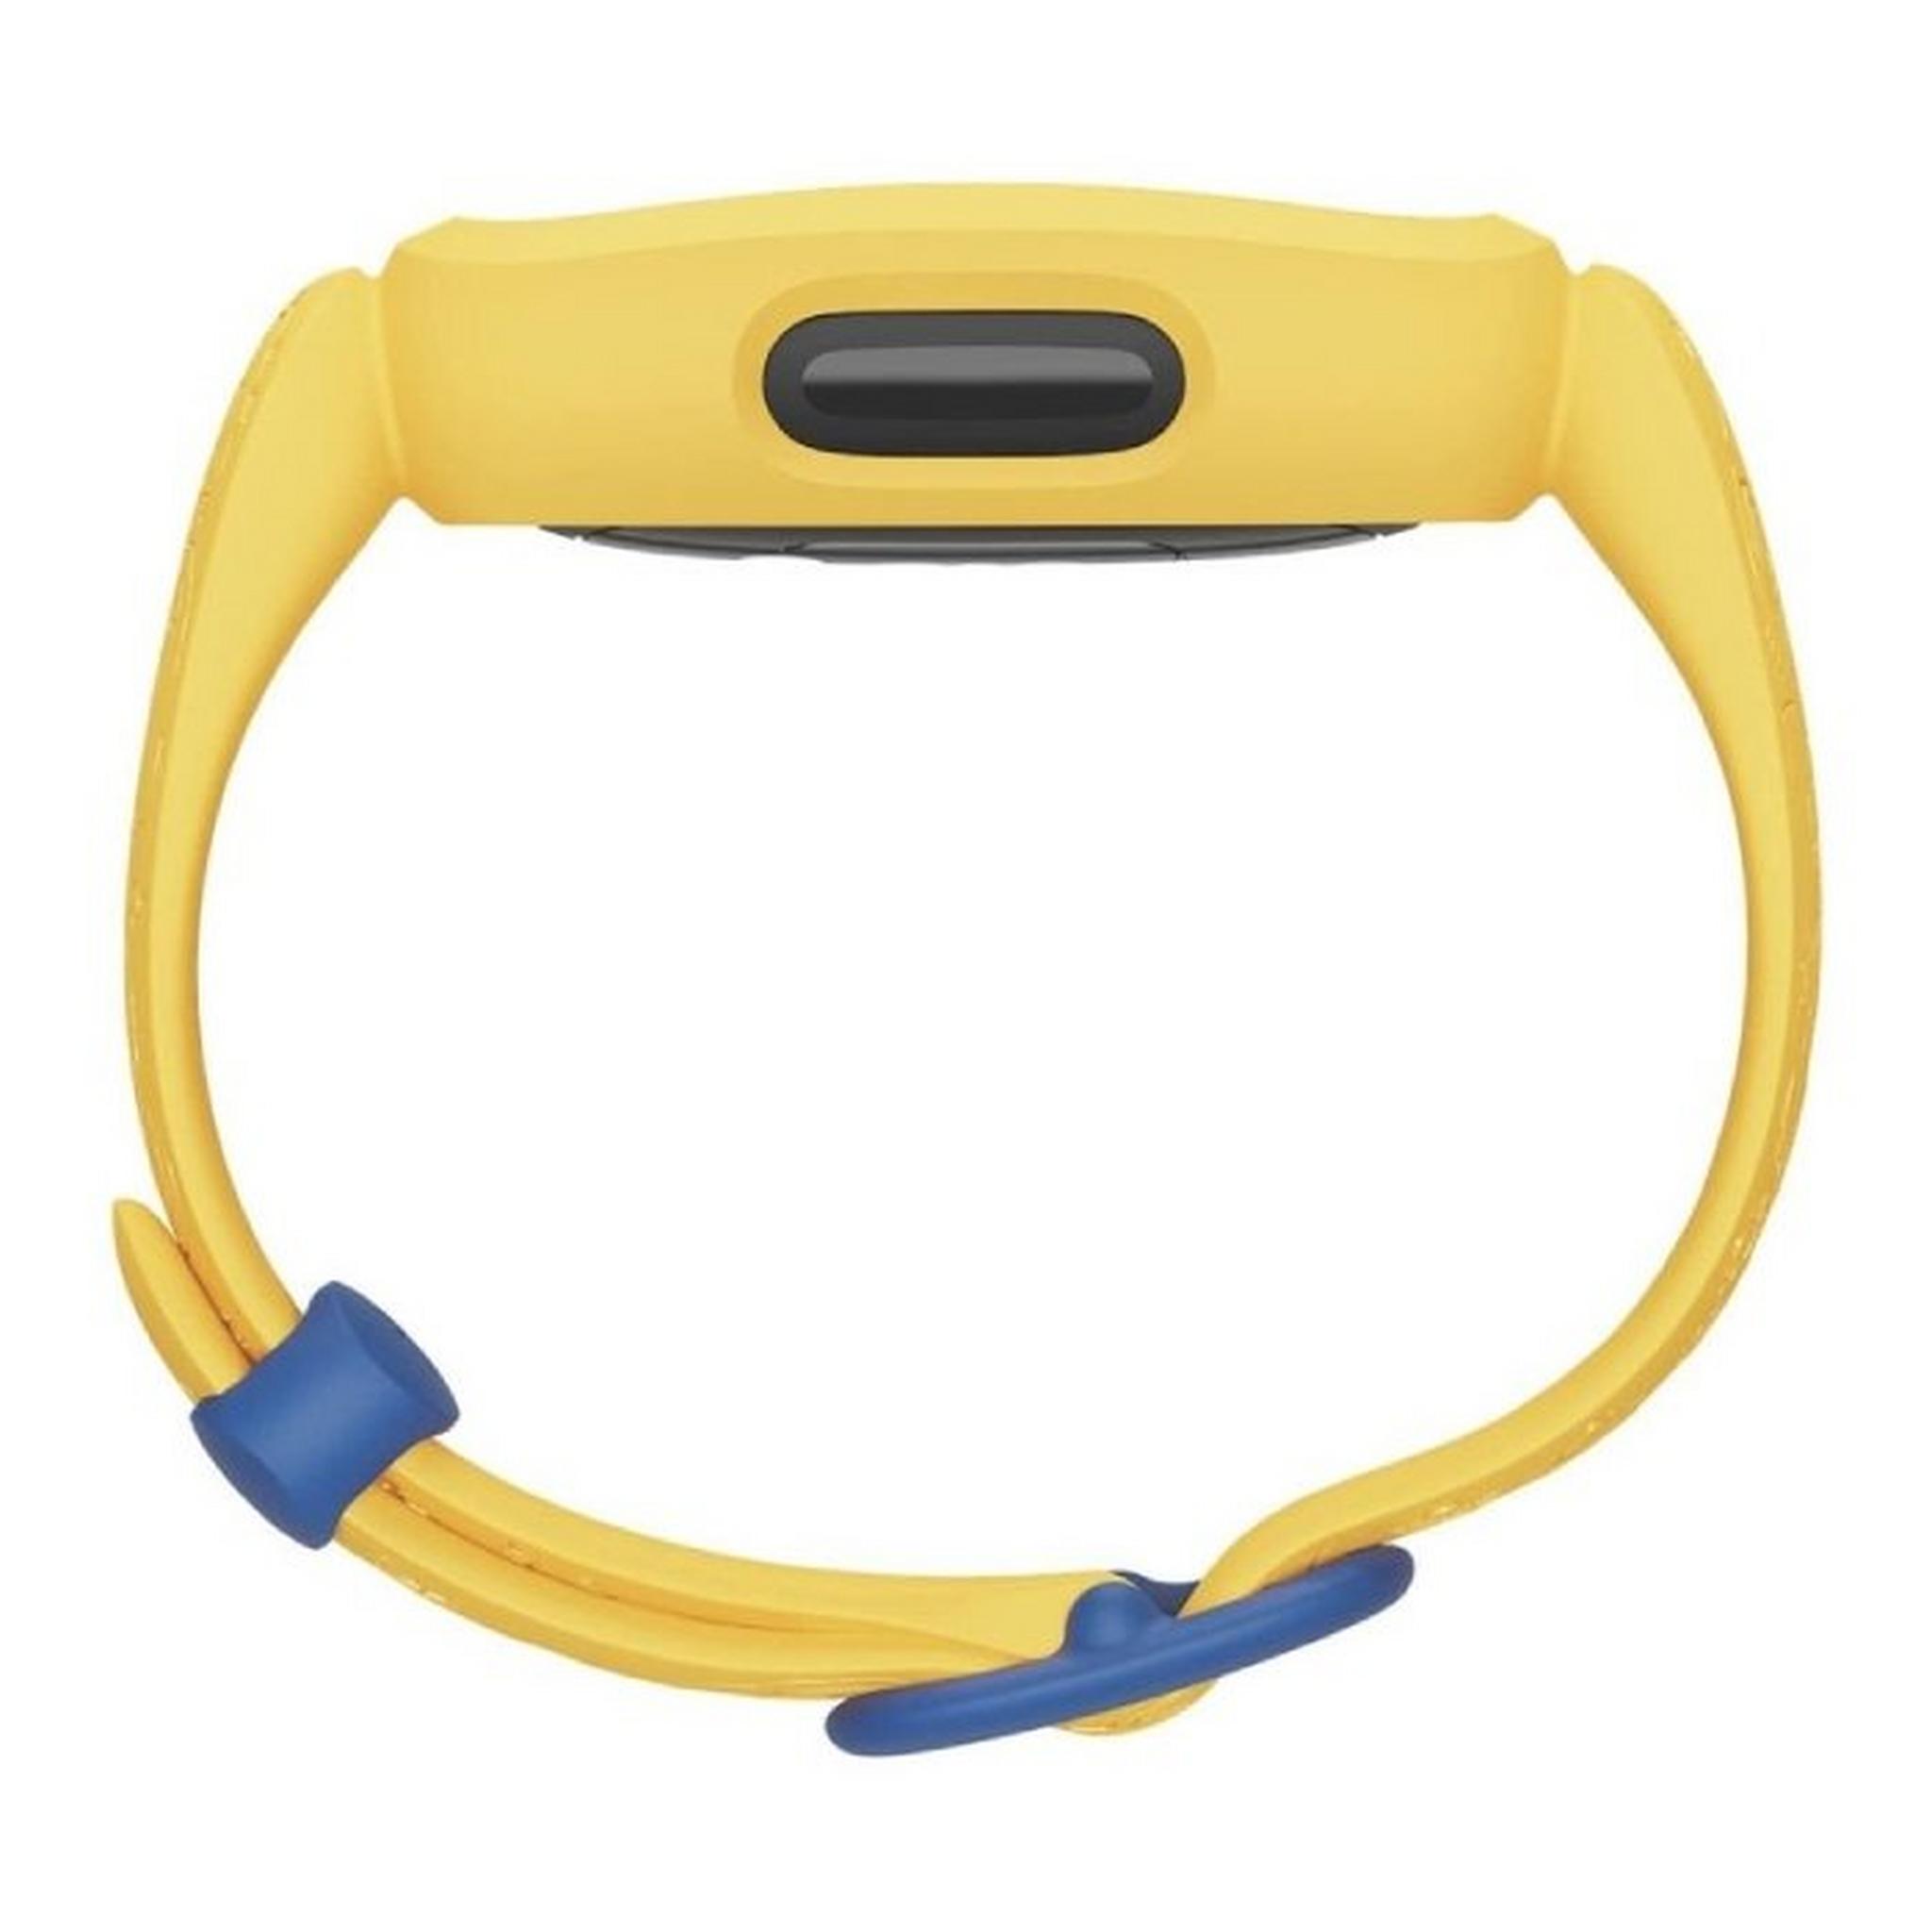 Fitbit  Ace 3 Activity Tracker for Kids - Minions Yellow